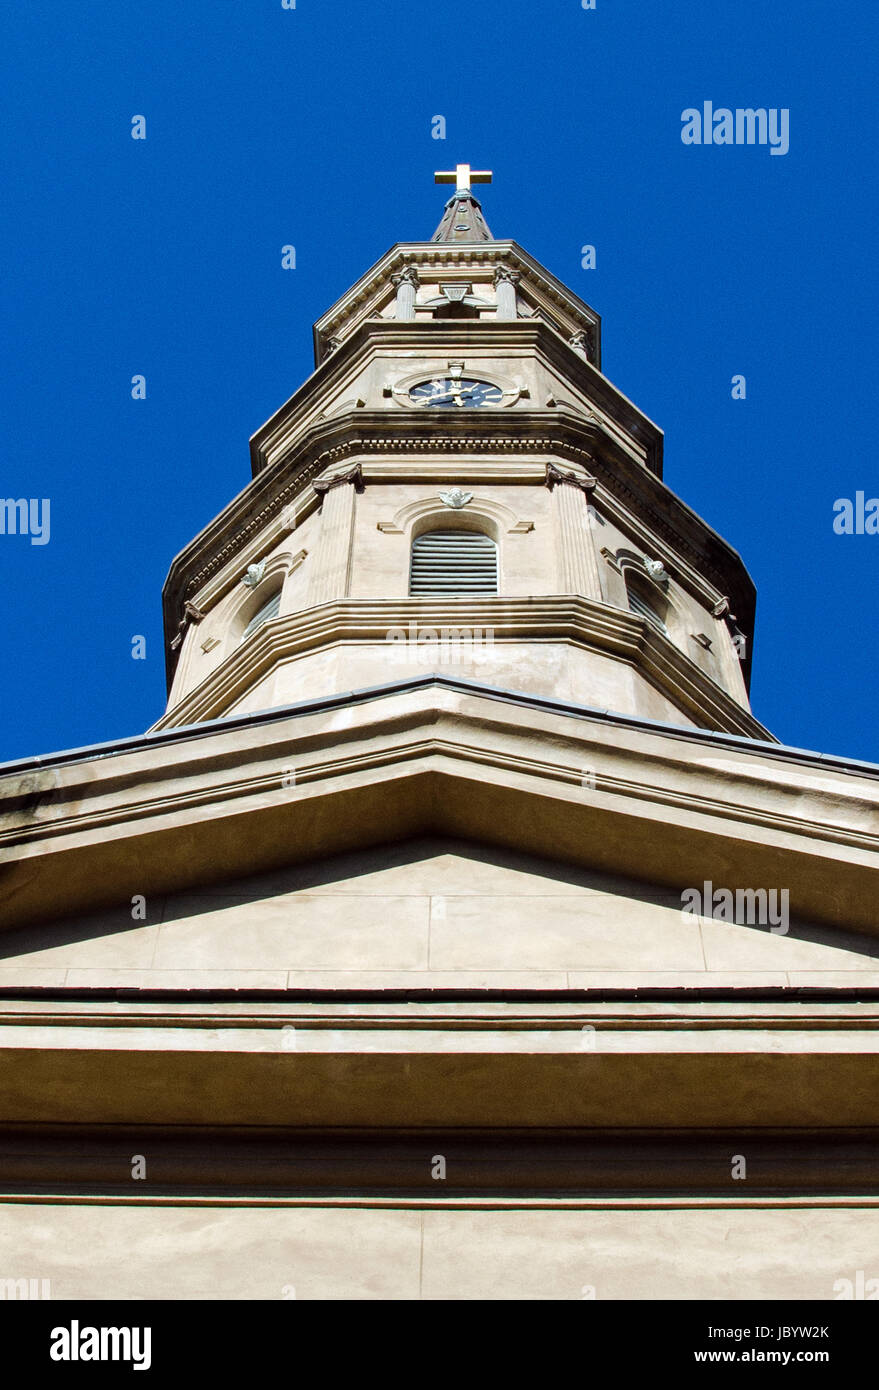 St. Philip's Episcopal Church, built in Charleston, SC in 1836, features an imposing tower designed in the Wren-Gibbs tradition. Stock Photo